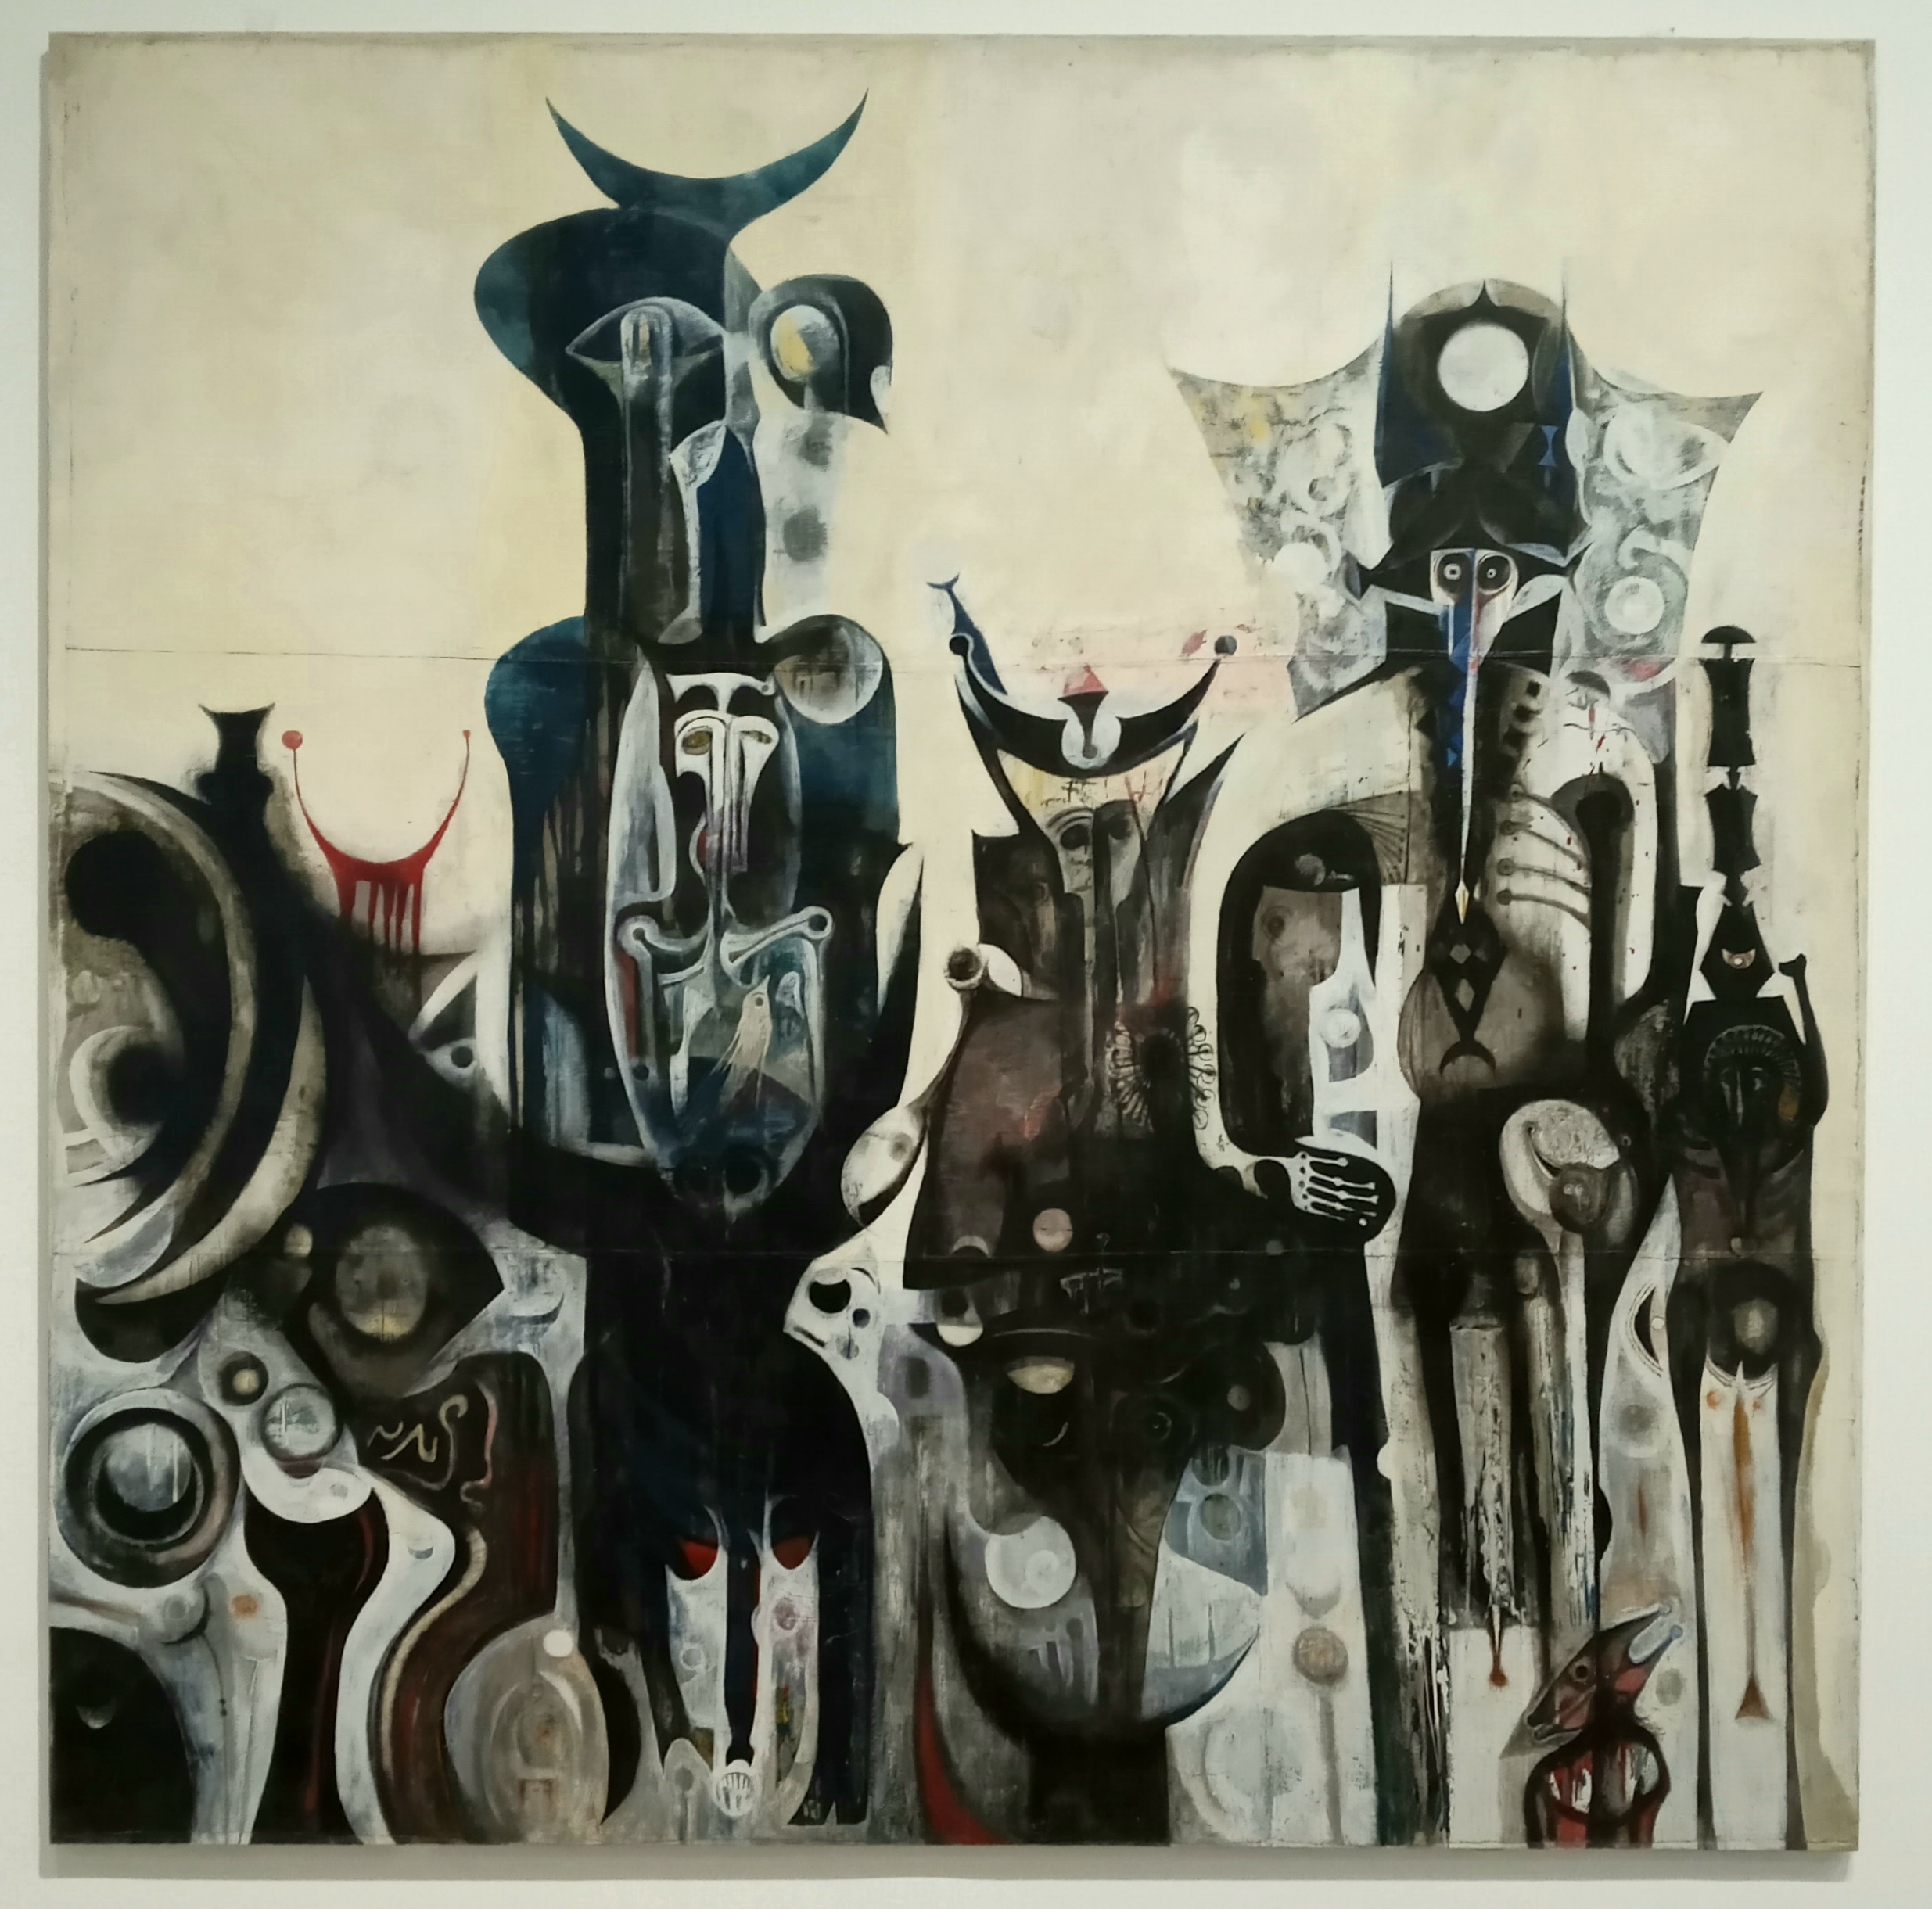 'Reborn Sounds of Childhood Dreams', 1961-65, enamel and oil on cotton